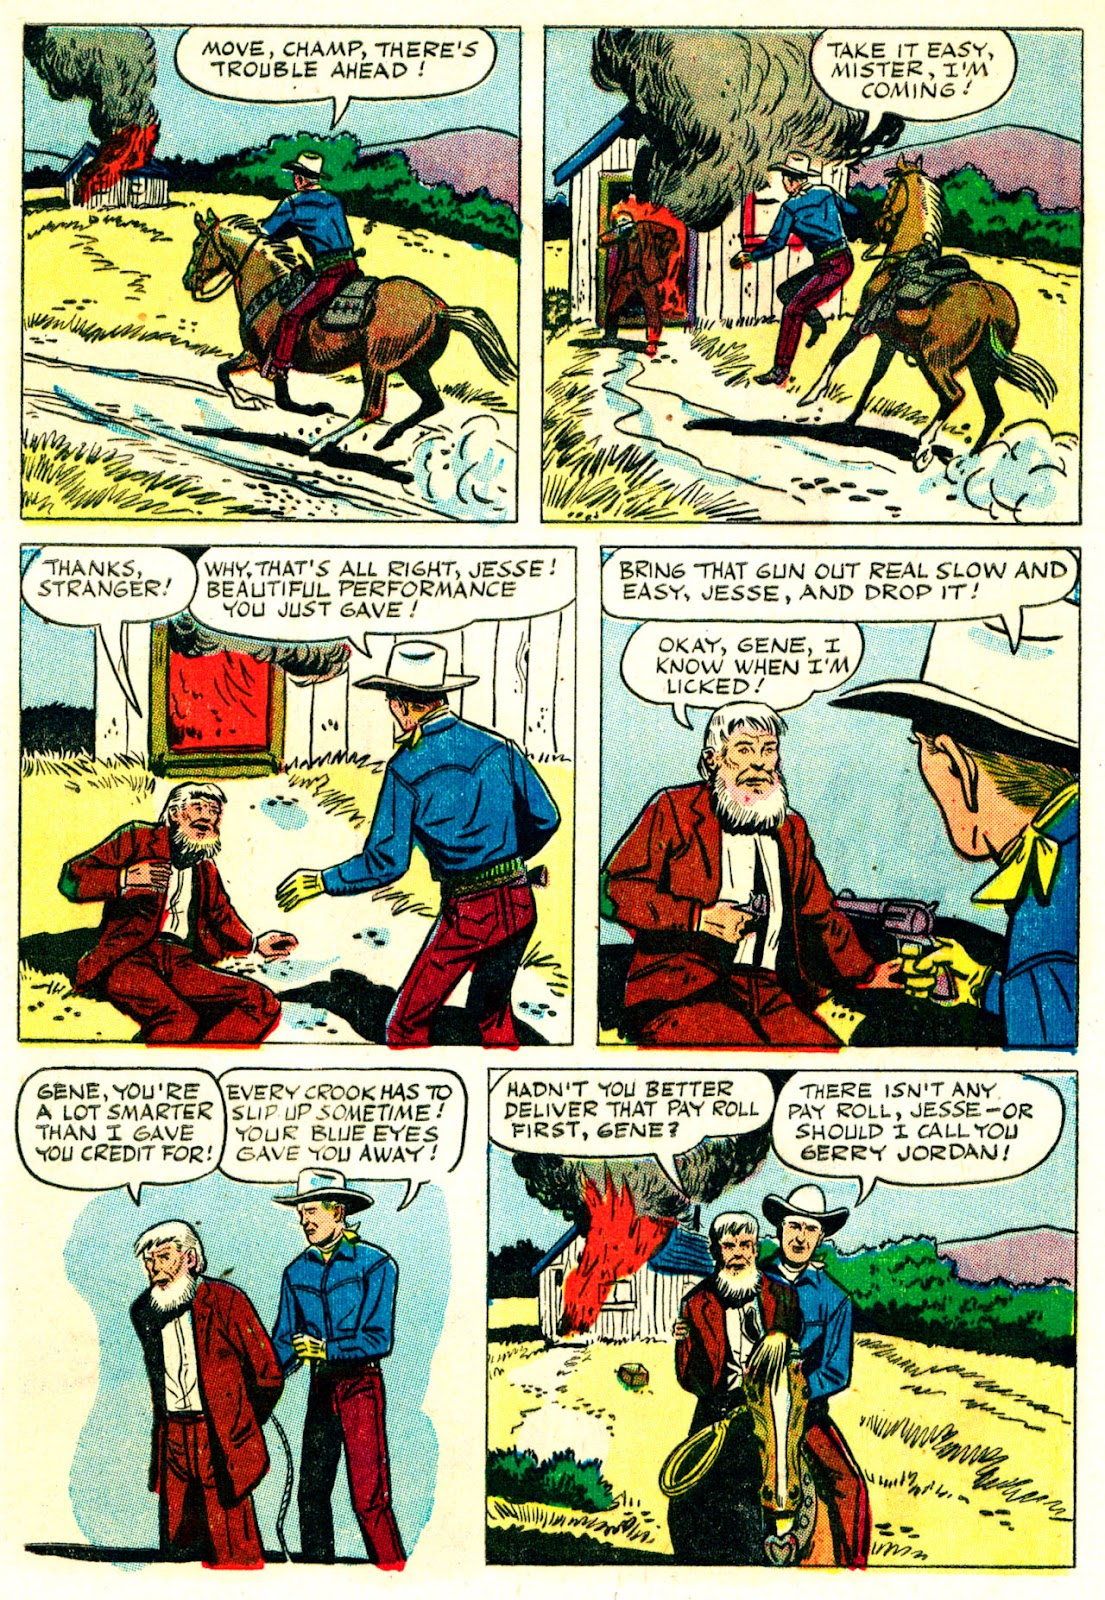 Gene Autry Comics (1946) issue 83 - Page 16